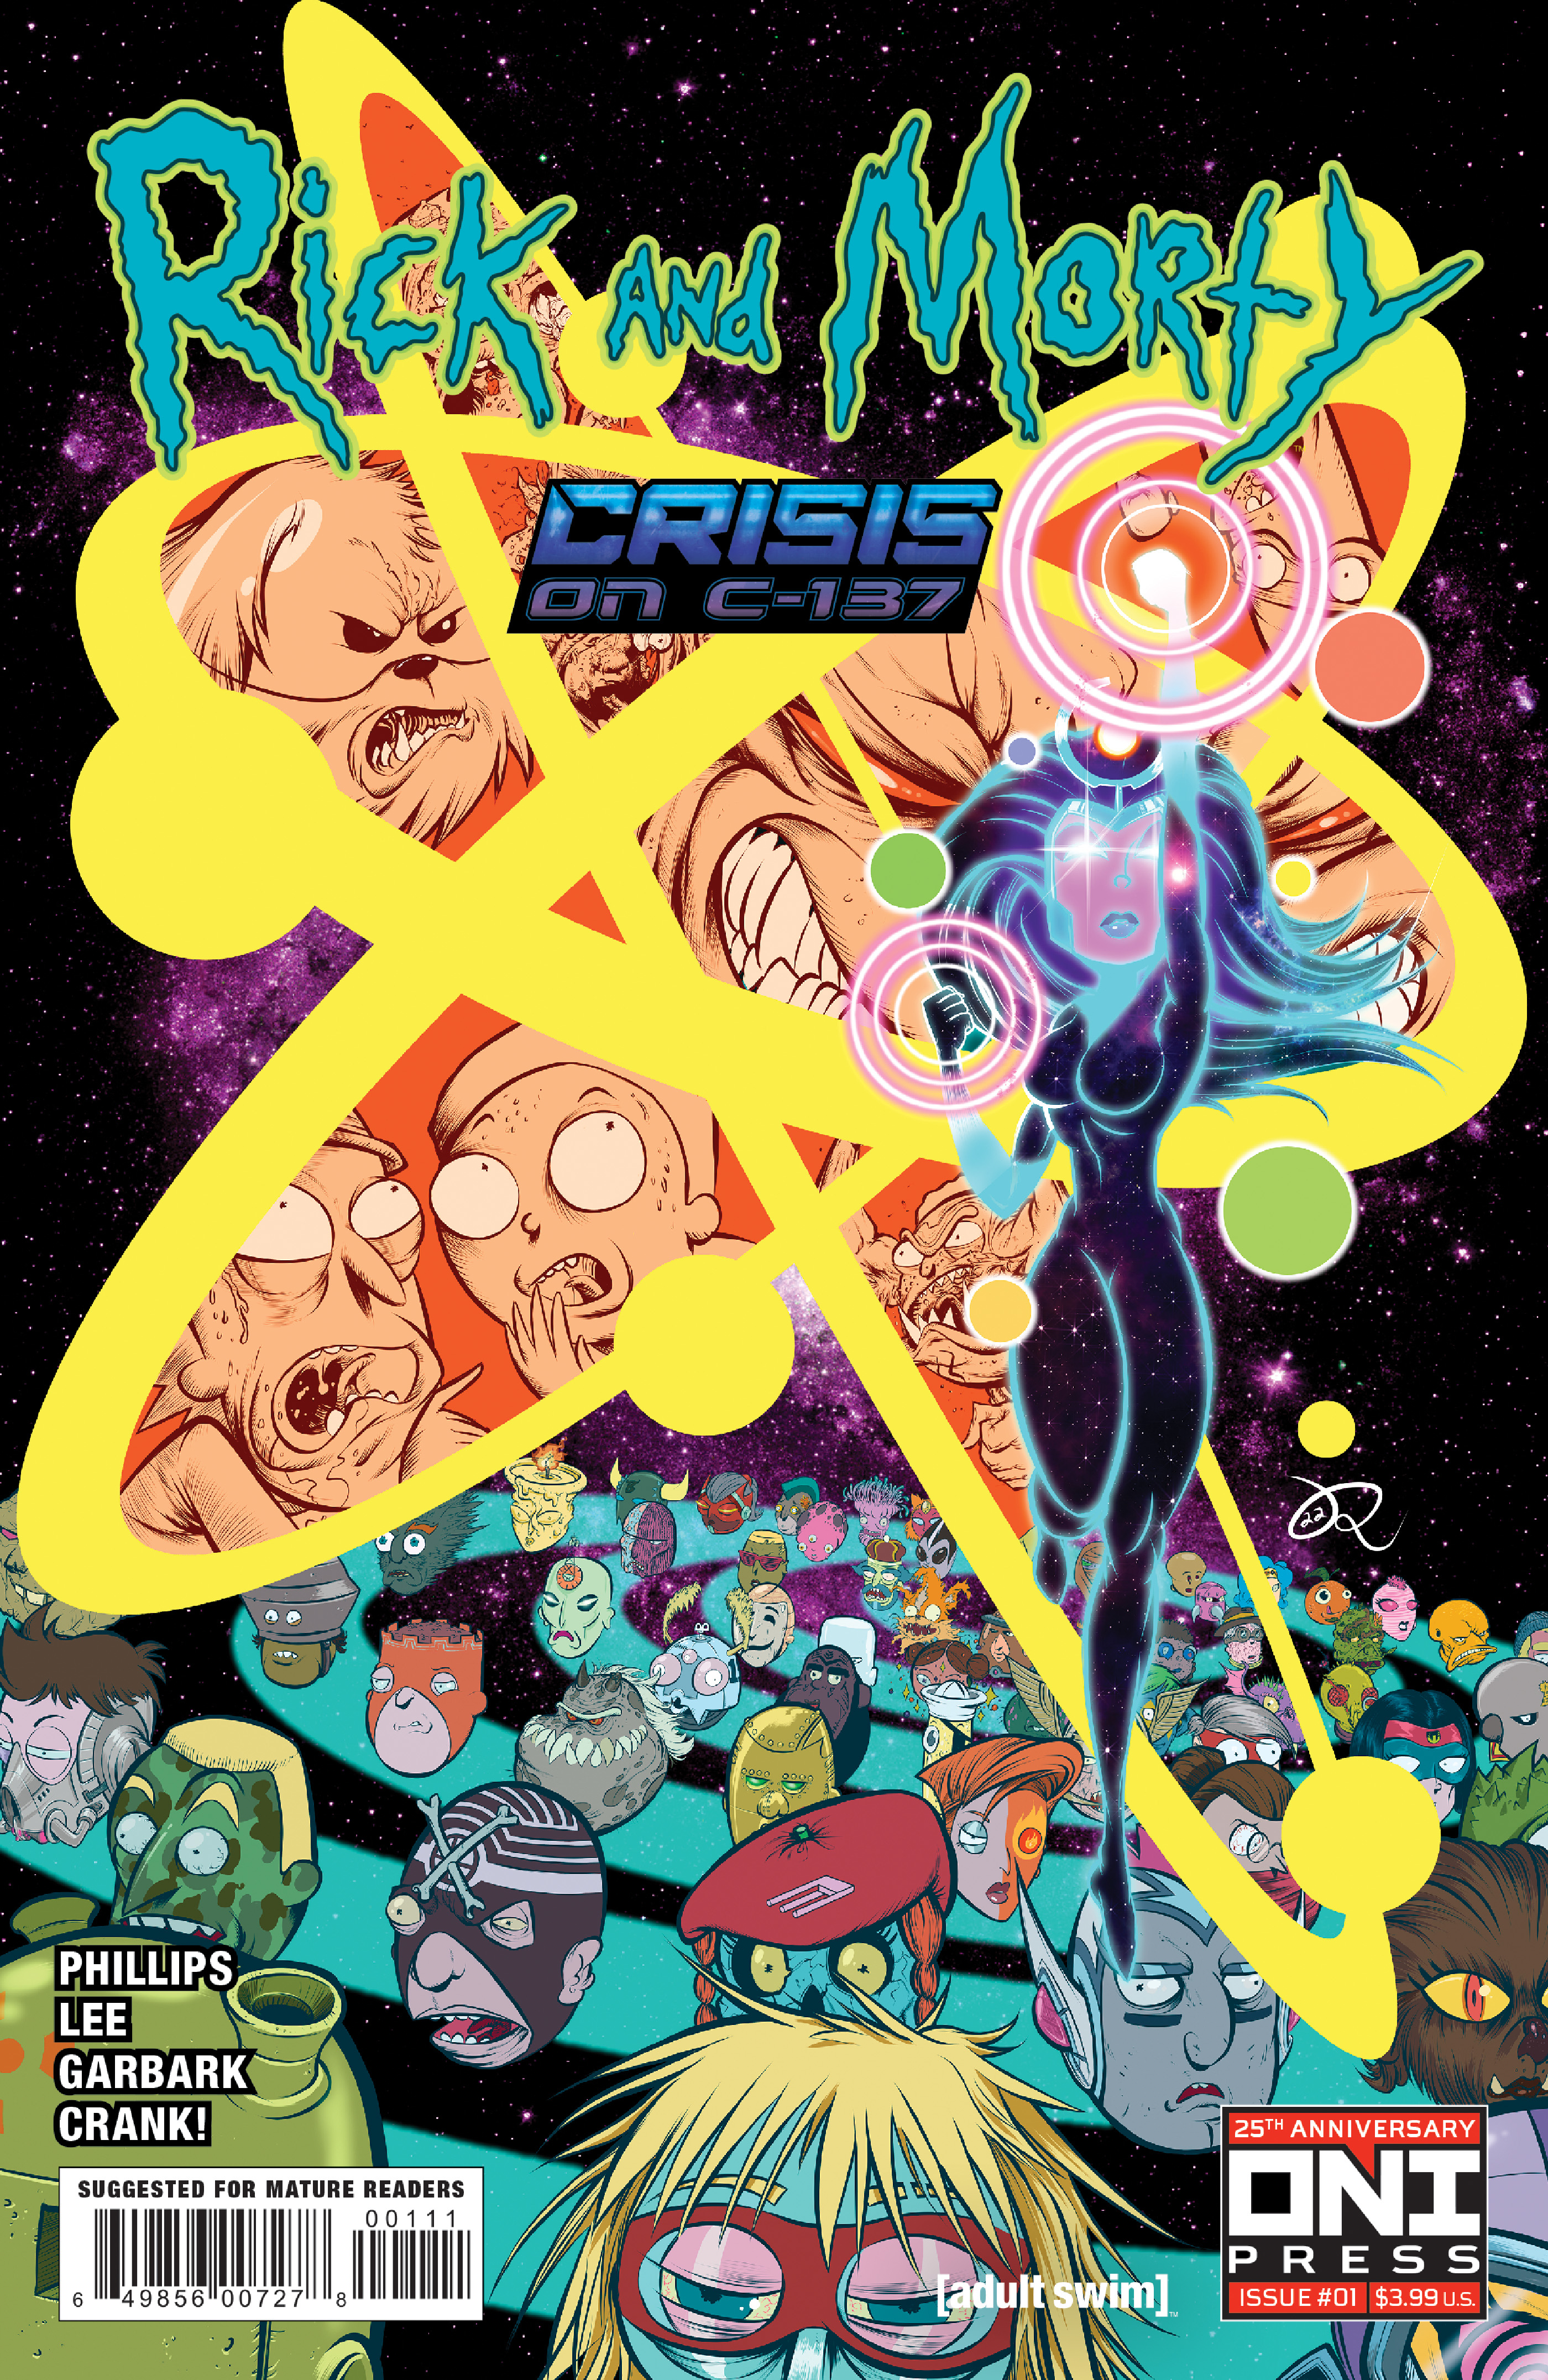 Rick and Morty Crisis On C 137 #1 Cover A Ryan Lee (Of 4)